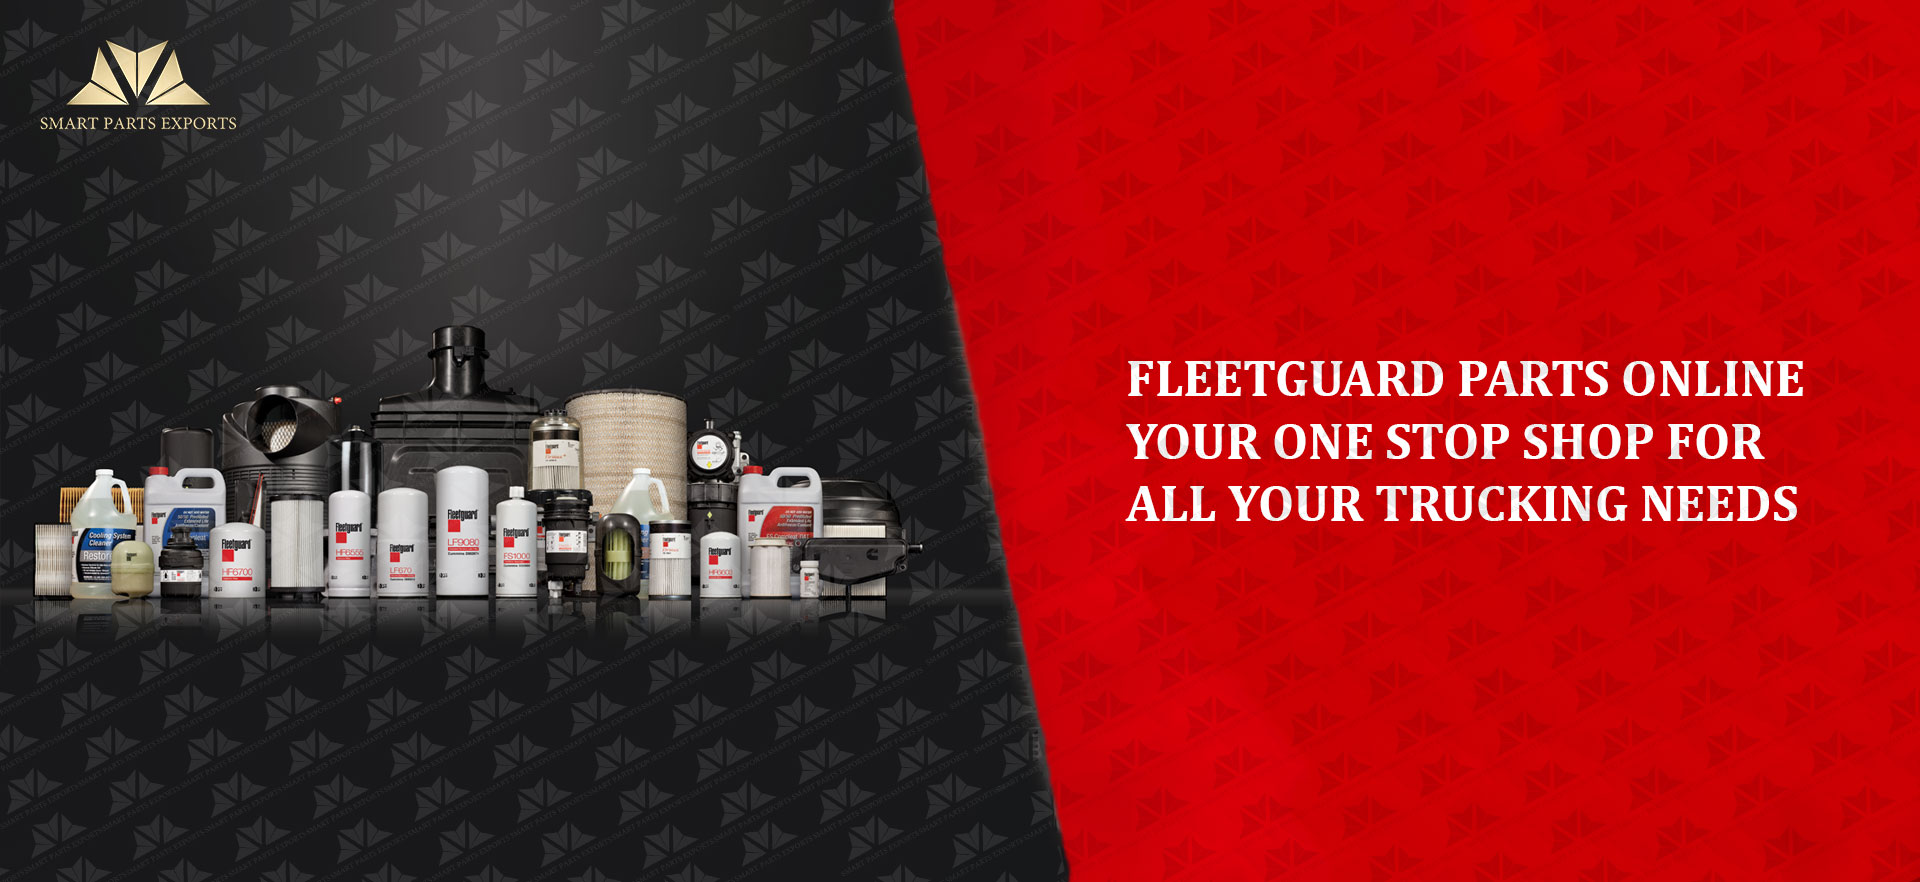 Fleetguard Parts Online: Your One-Stop Shop for All Your Trucking Needs